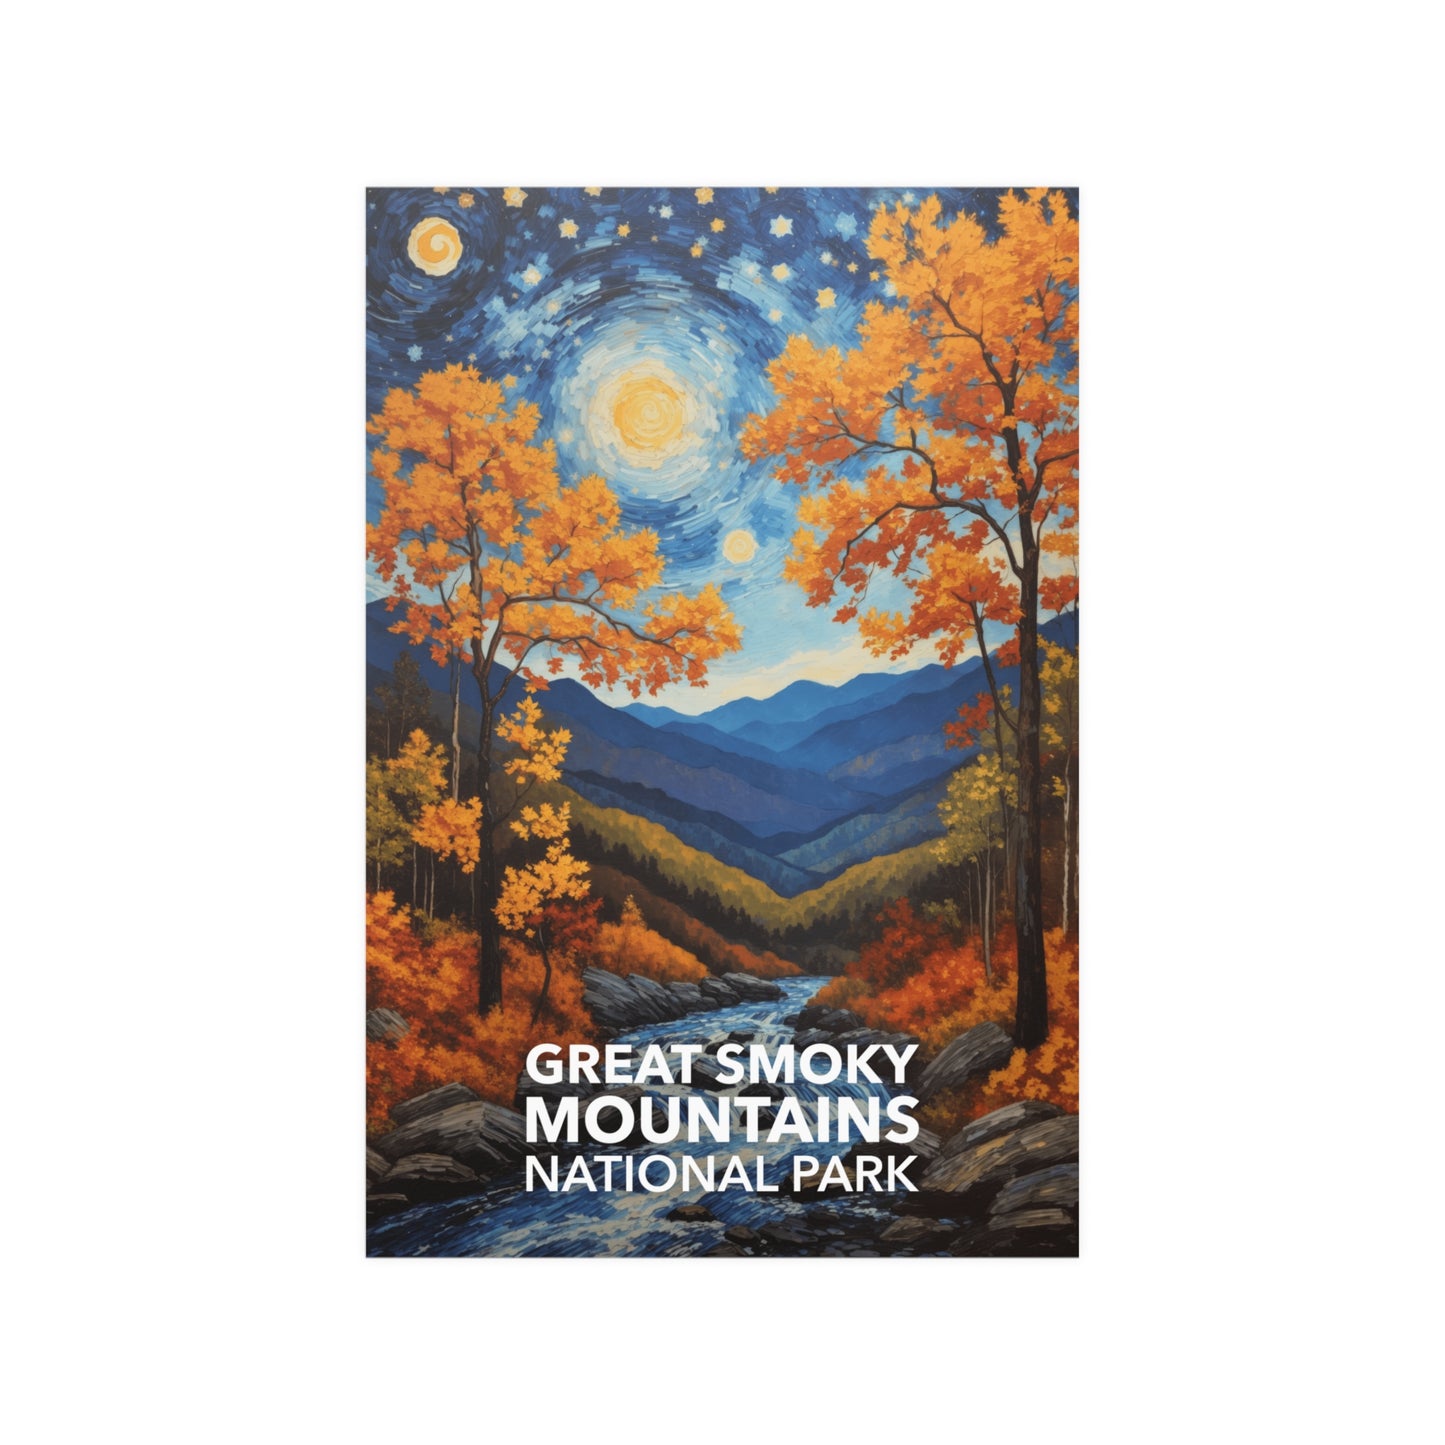 Great Smoky Mountains National Park Poster - Starry Night